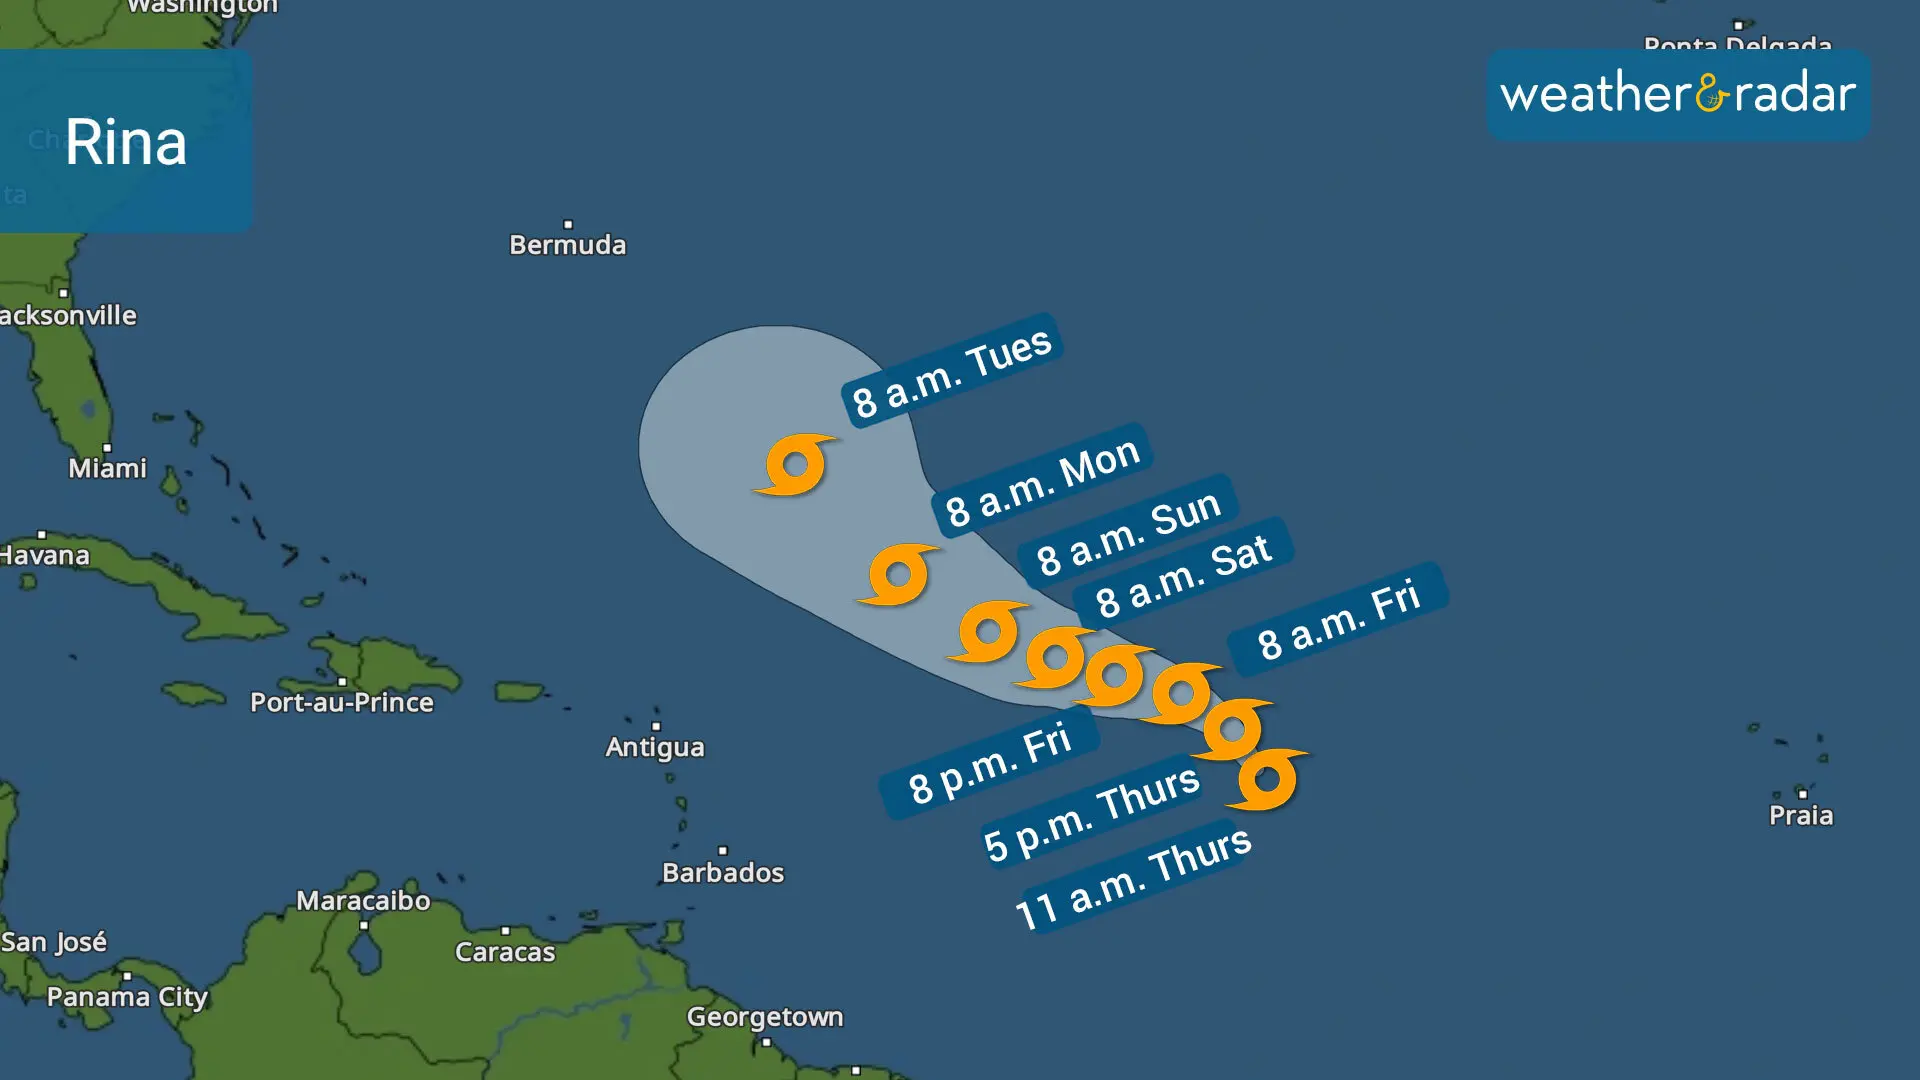 Rina's track issued by the NHC on Thursday (sept 28) at 11 a.m. 